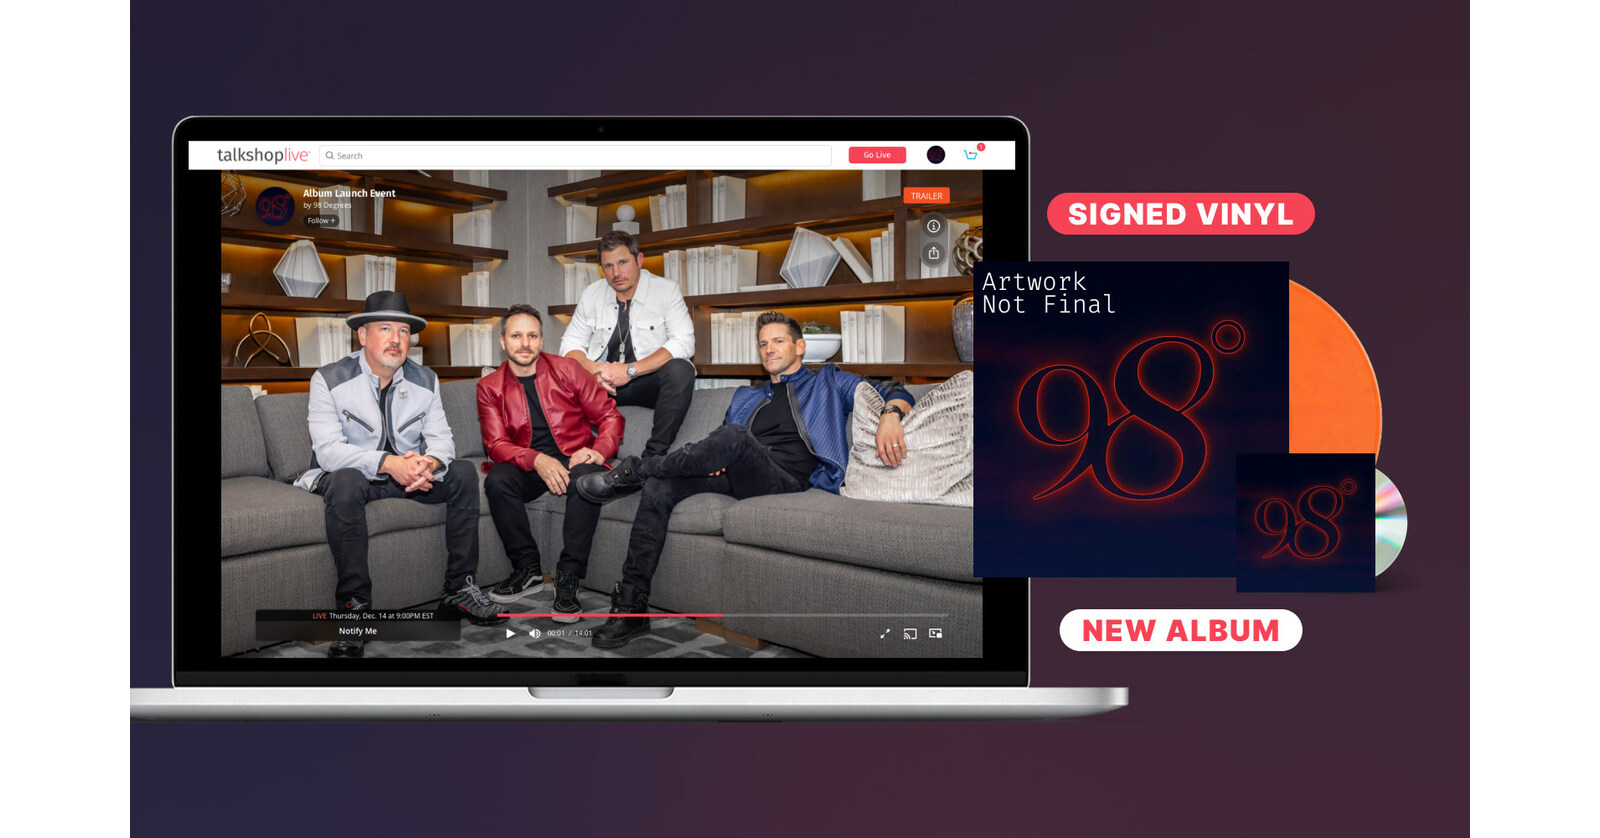 98 Degrees Reveals New Album With Pre-order Exclusively on TalkShopLive